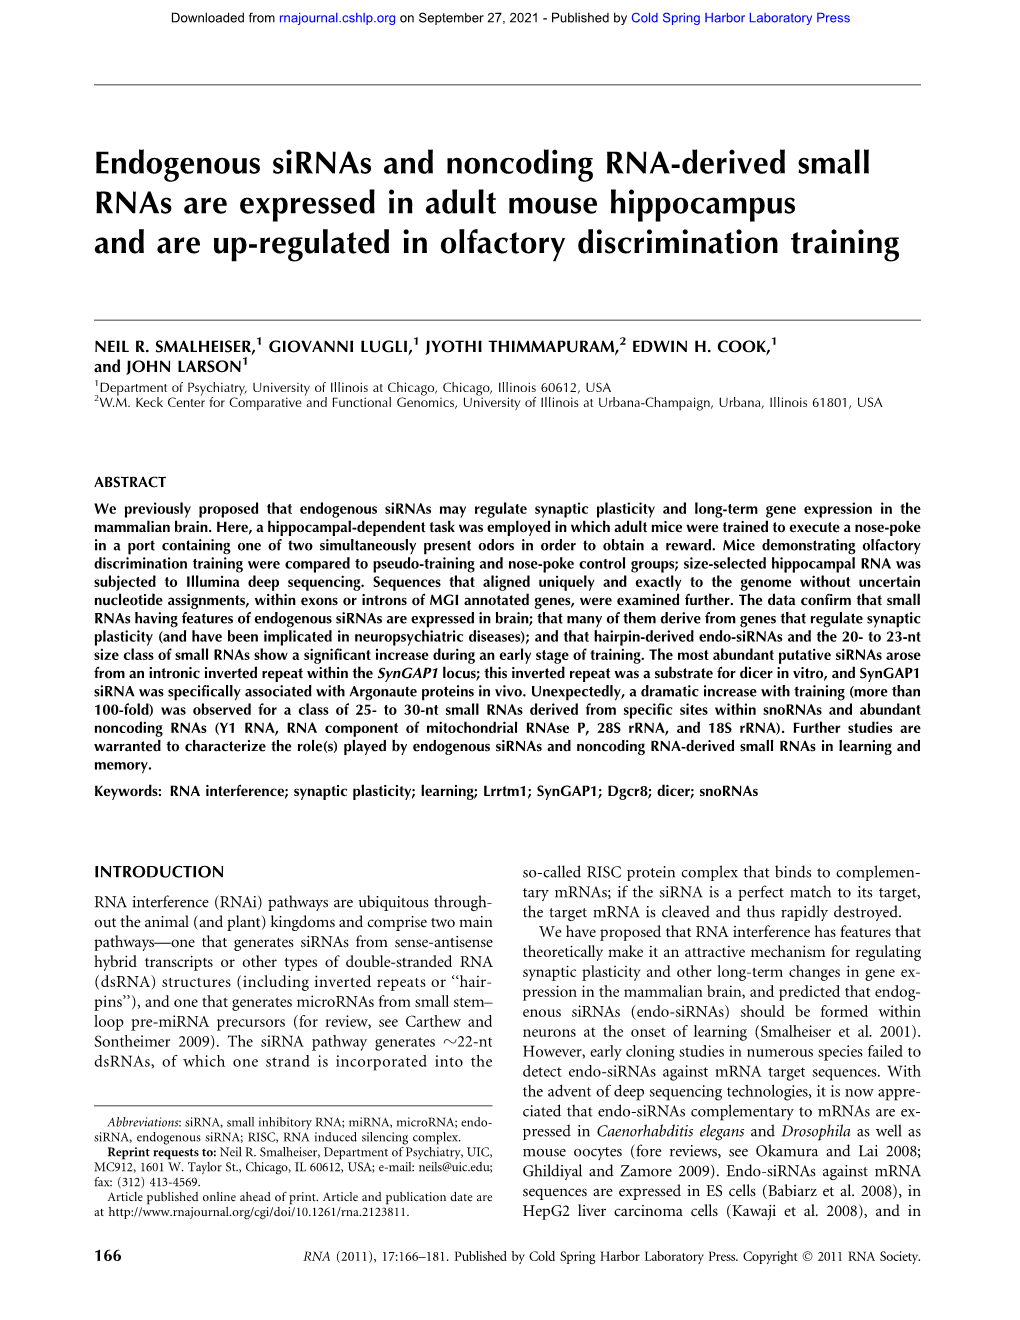 Endogenous Sirnas and Noncoding RNA-Derived Small Rnas Are Expressed in Adult Mouse Hippocampus and Are Up-Regulated in Olfactory Discrimination Training